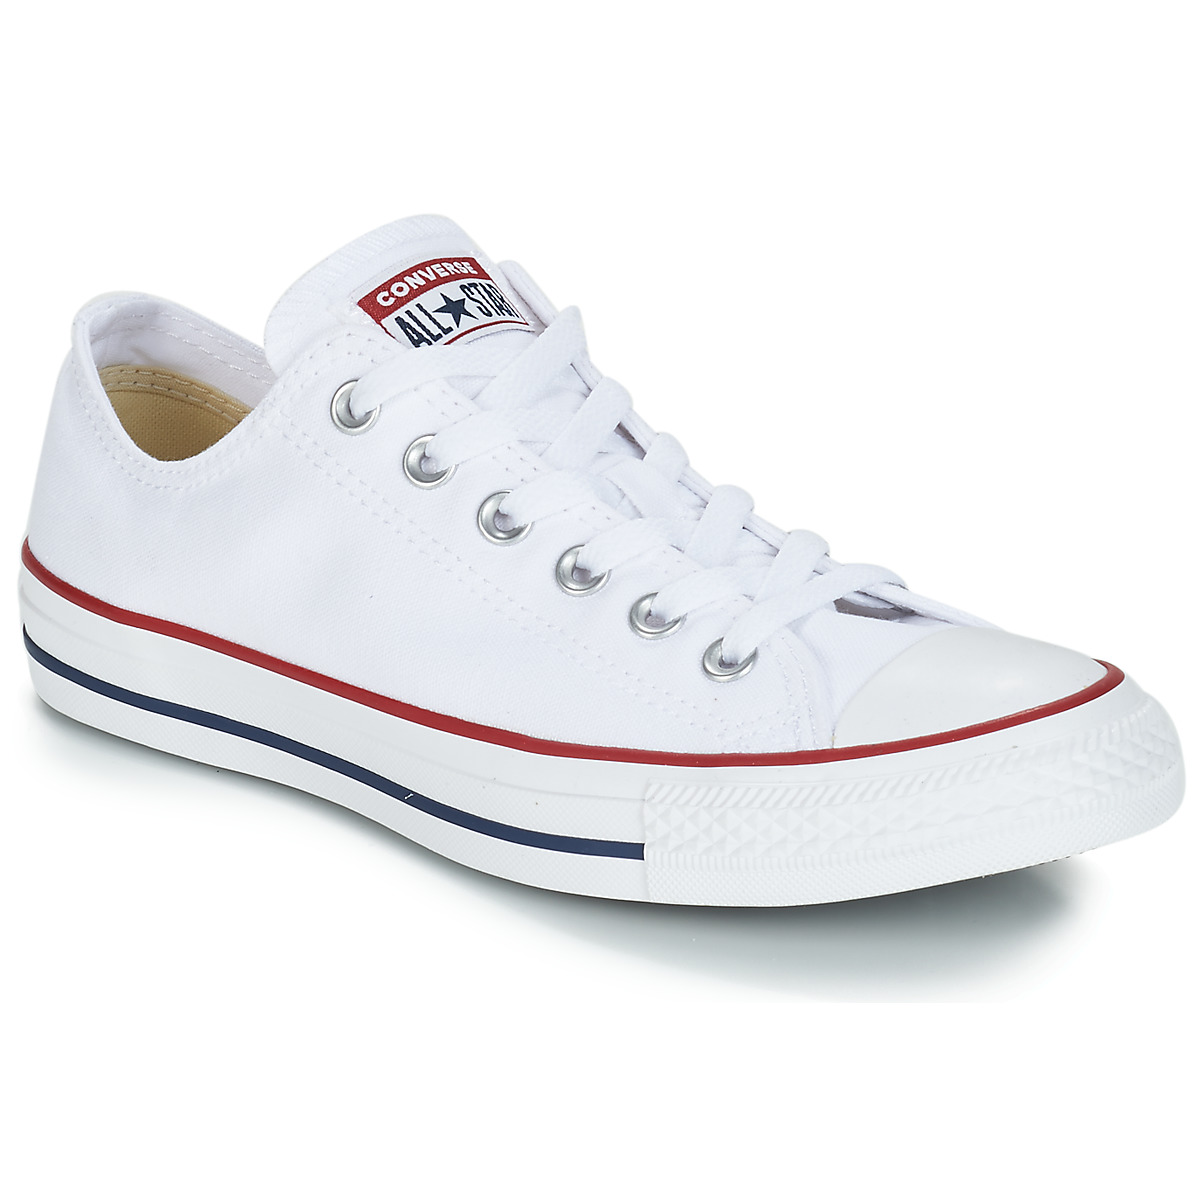 Converse Alte Bianche Con Rialzo Hot Sale, UP TO 63% OFF | www ... الروج السحري